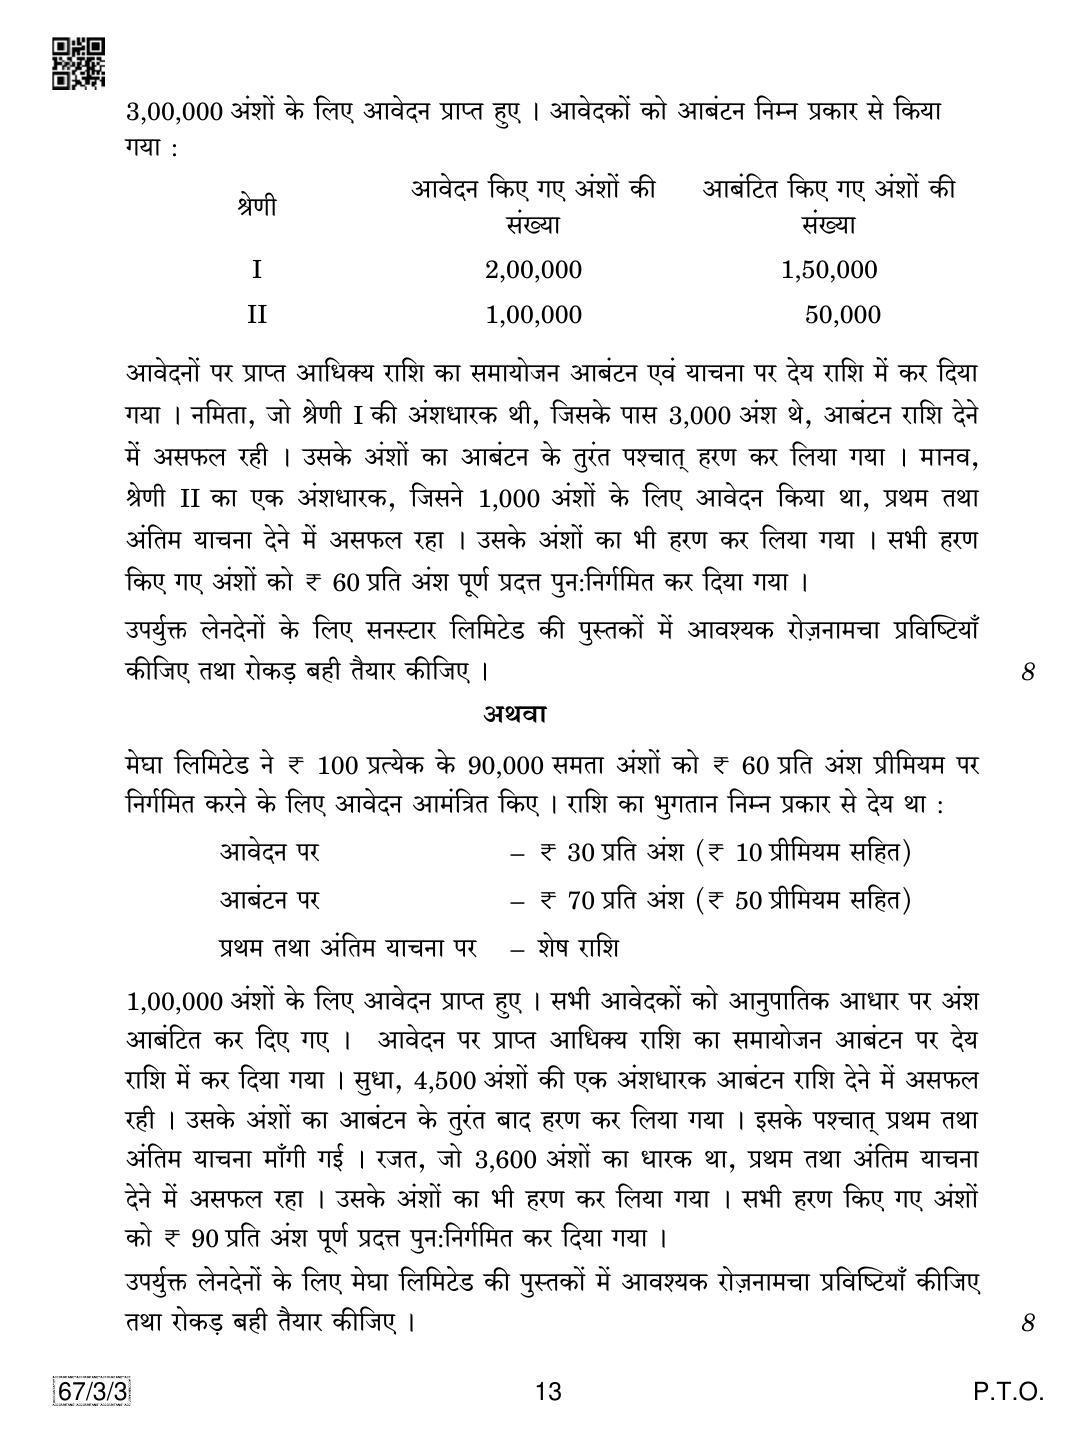 CBSE Class 12 67-3-3 Accountancy 2019 Question Paper - Page 13